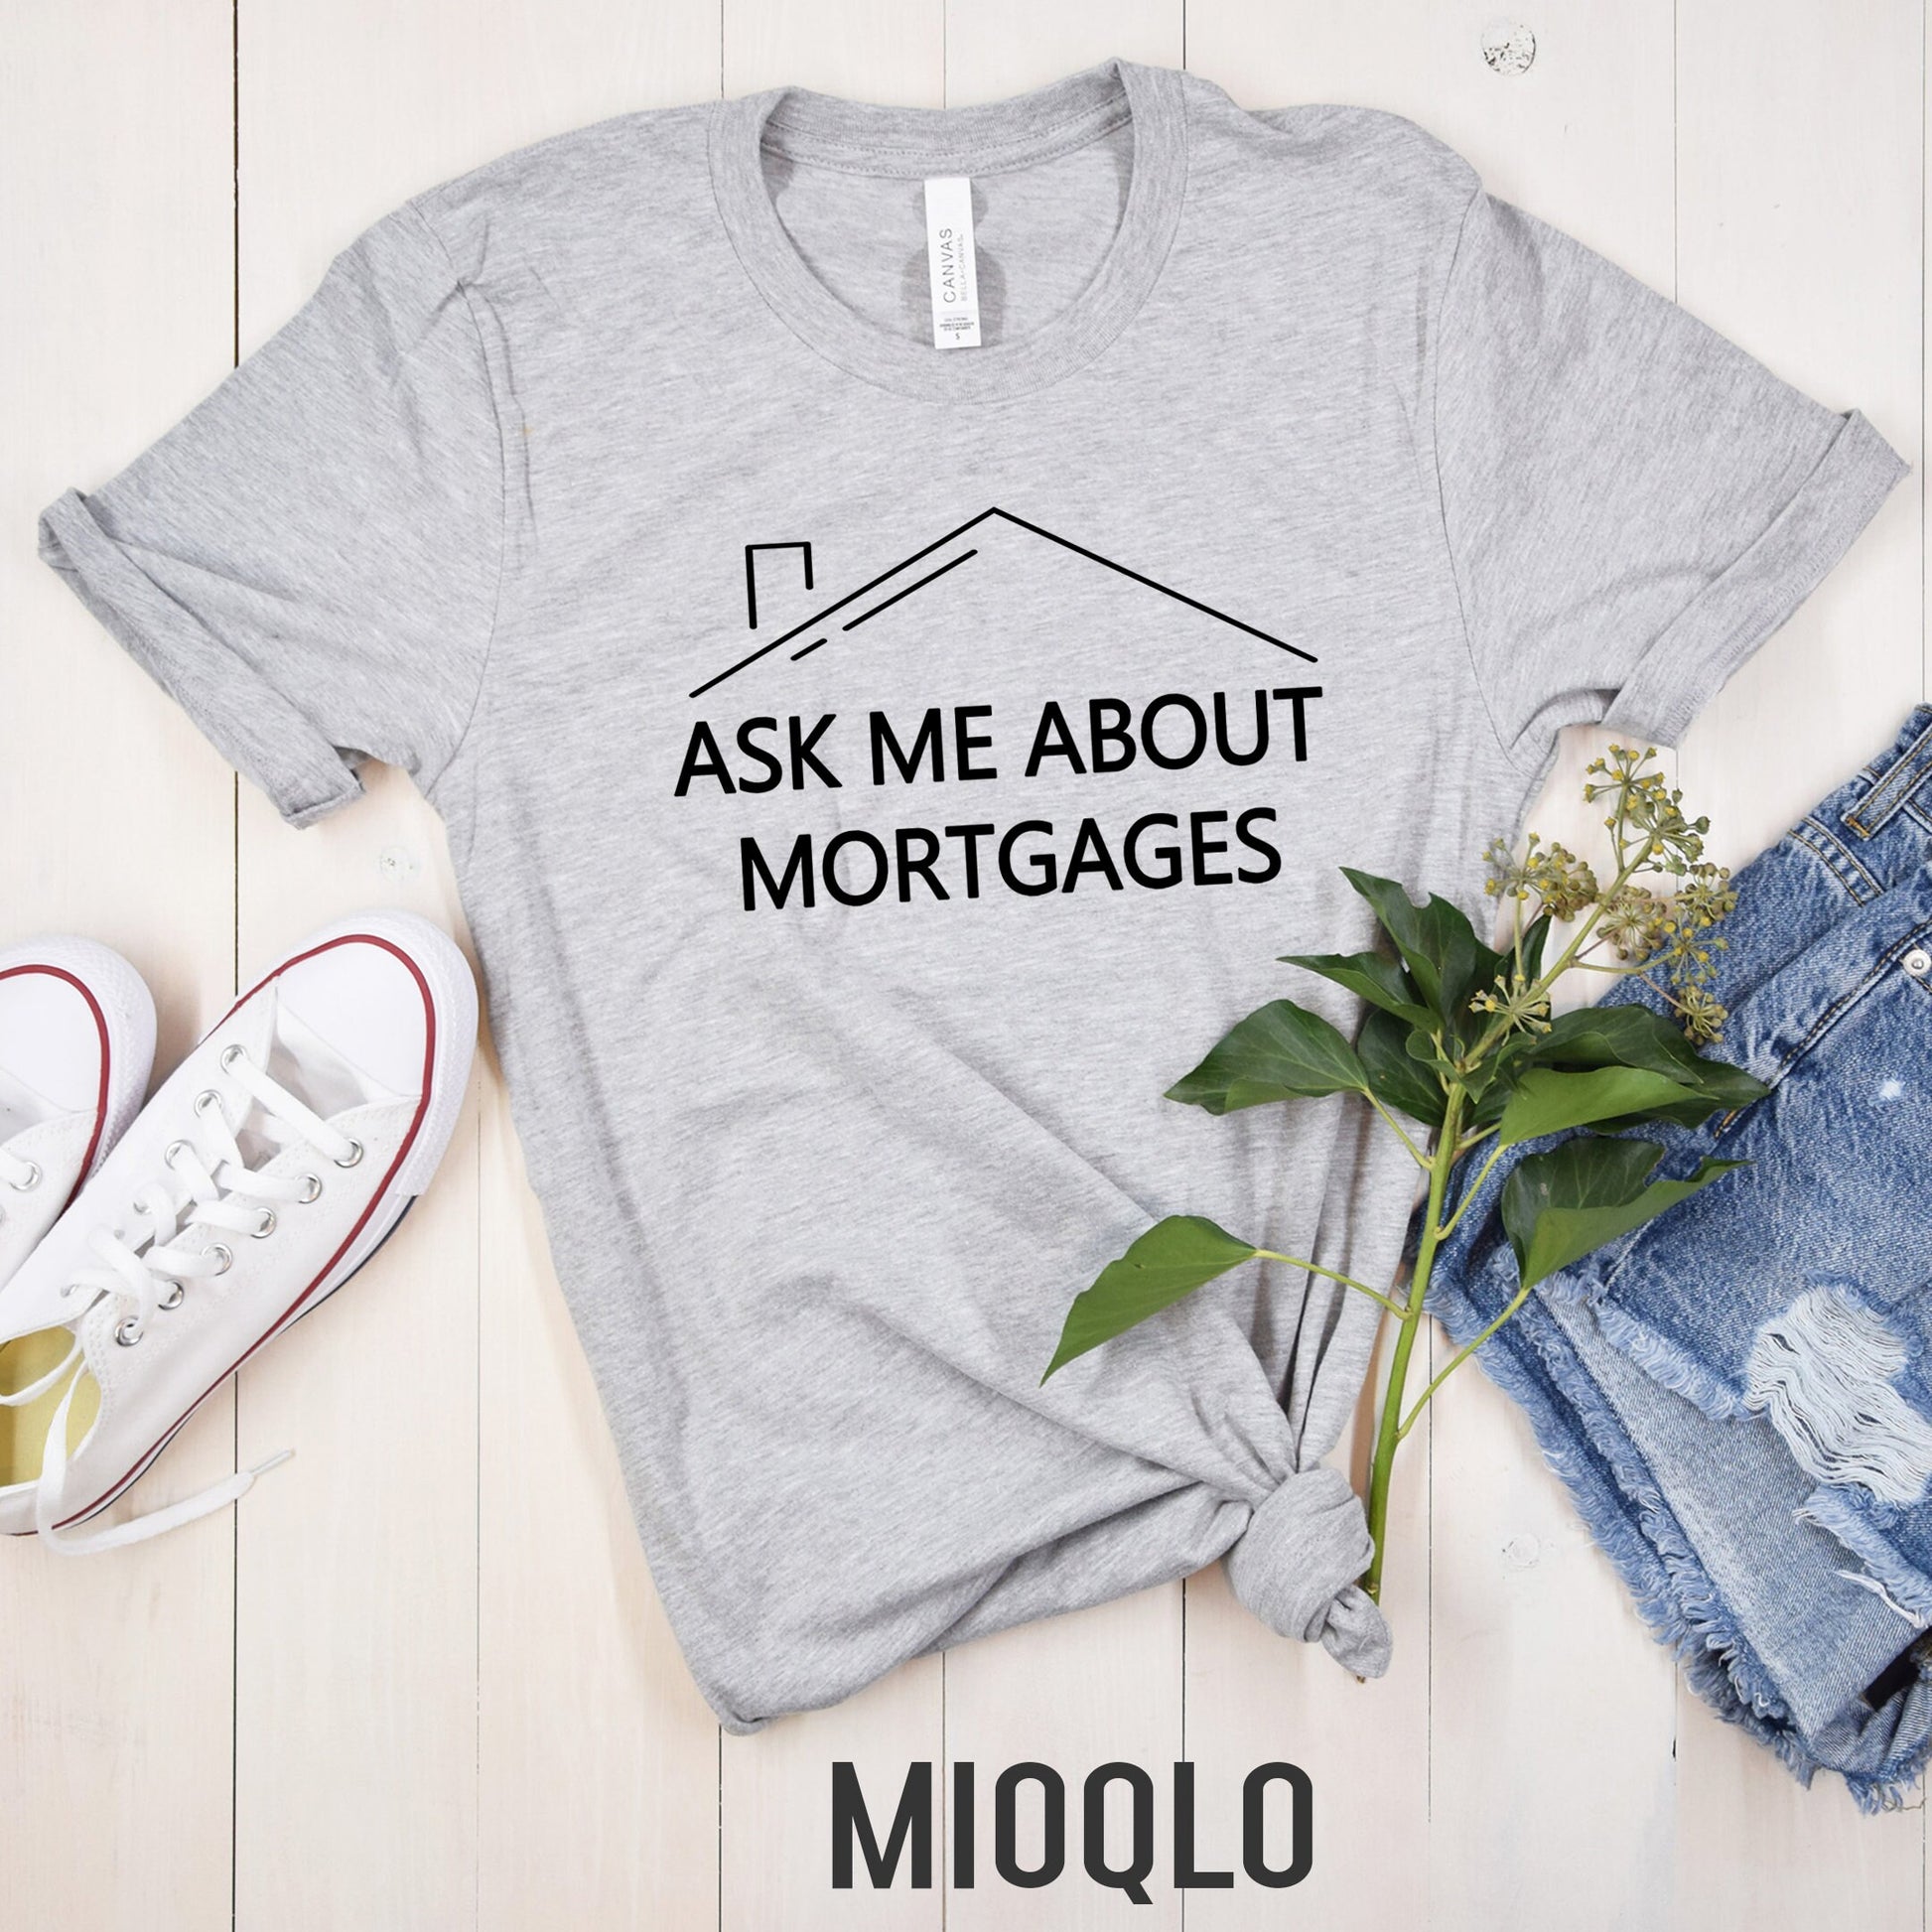 Real Estate Shirt, Realtor Shirt, Ask Me About Mortgages, Mortgage Tee, Loan Officer, Unisex, Simple, Minimalist, Real Estate Closing Gifts